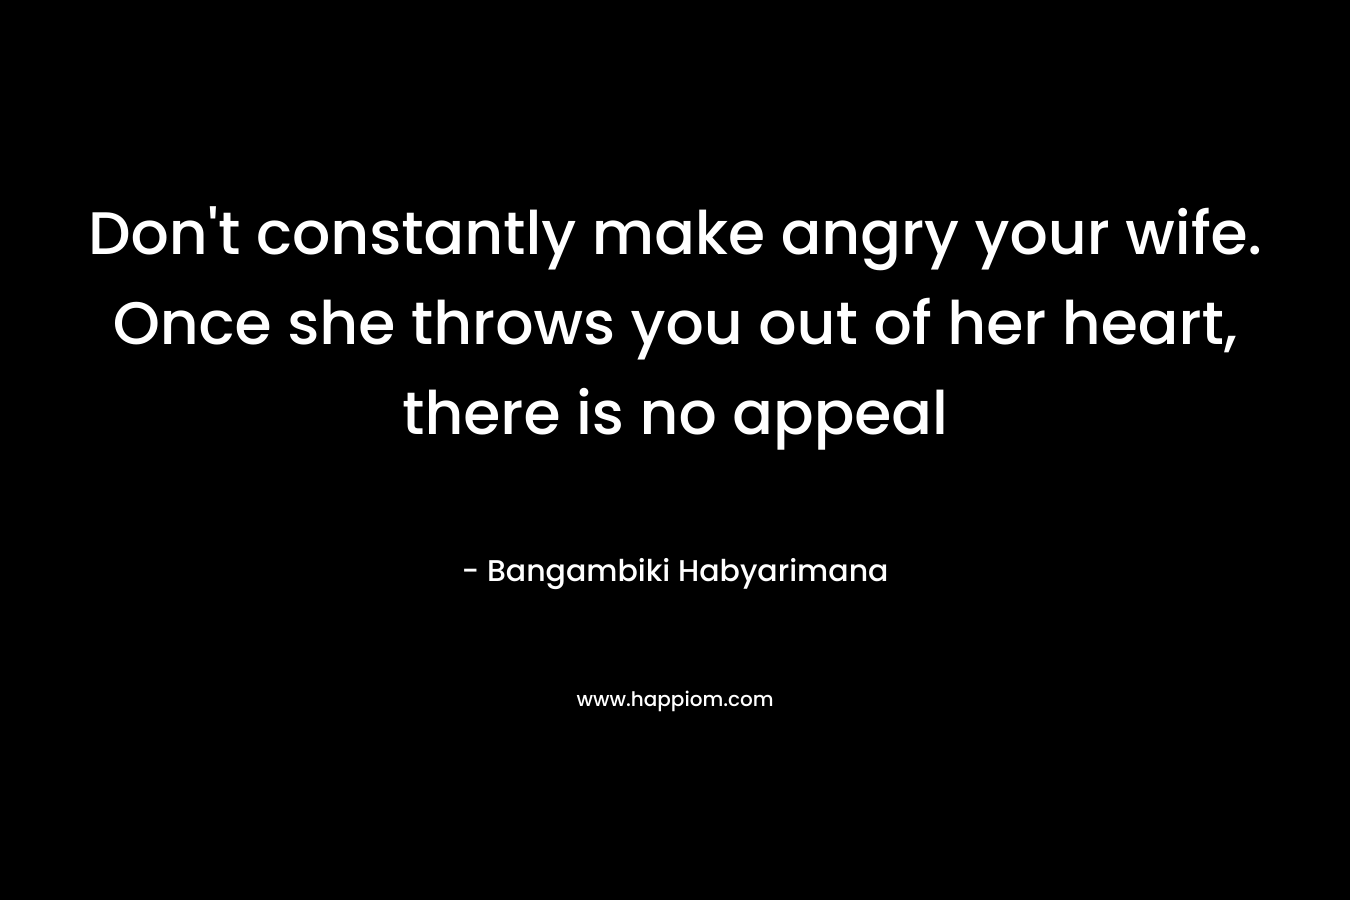 Don't constantly make angry your wife. Once she throws you out of her heart, there is no appeal